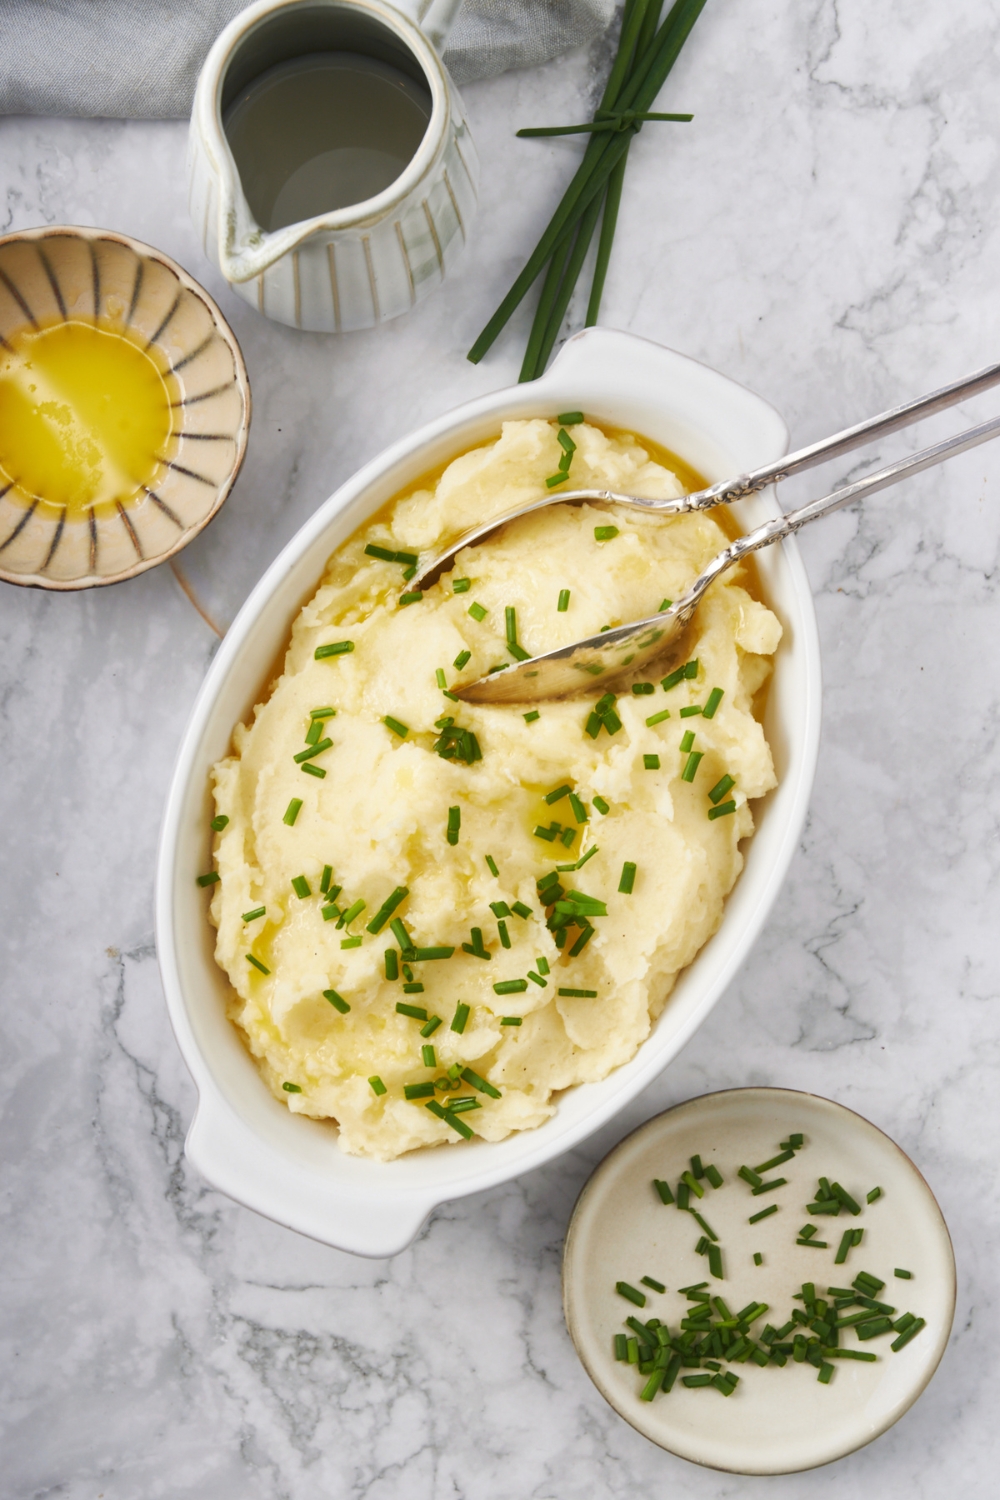 A white baking dish with mashed potatoes, two serving spoons, and fresh chives garnished on top. A plate of chives and a bowl of melted butter surrounds the baking dish.